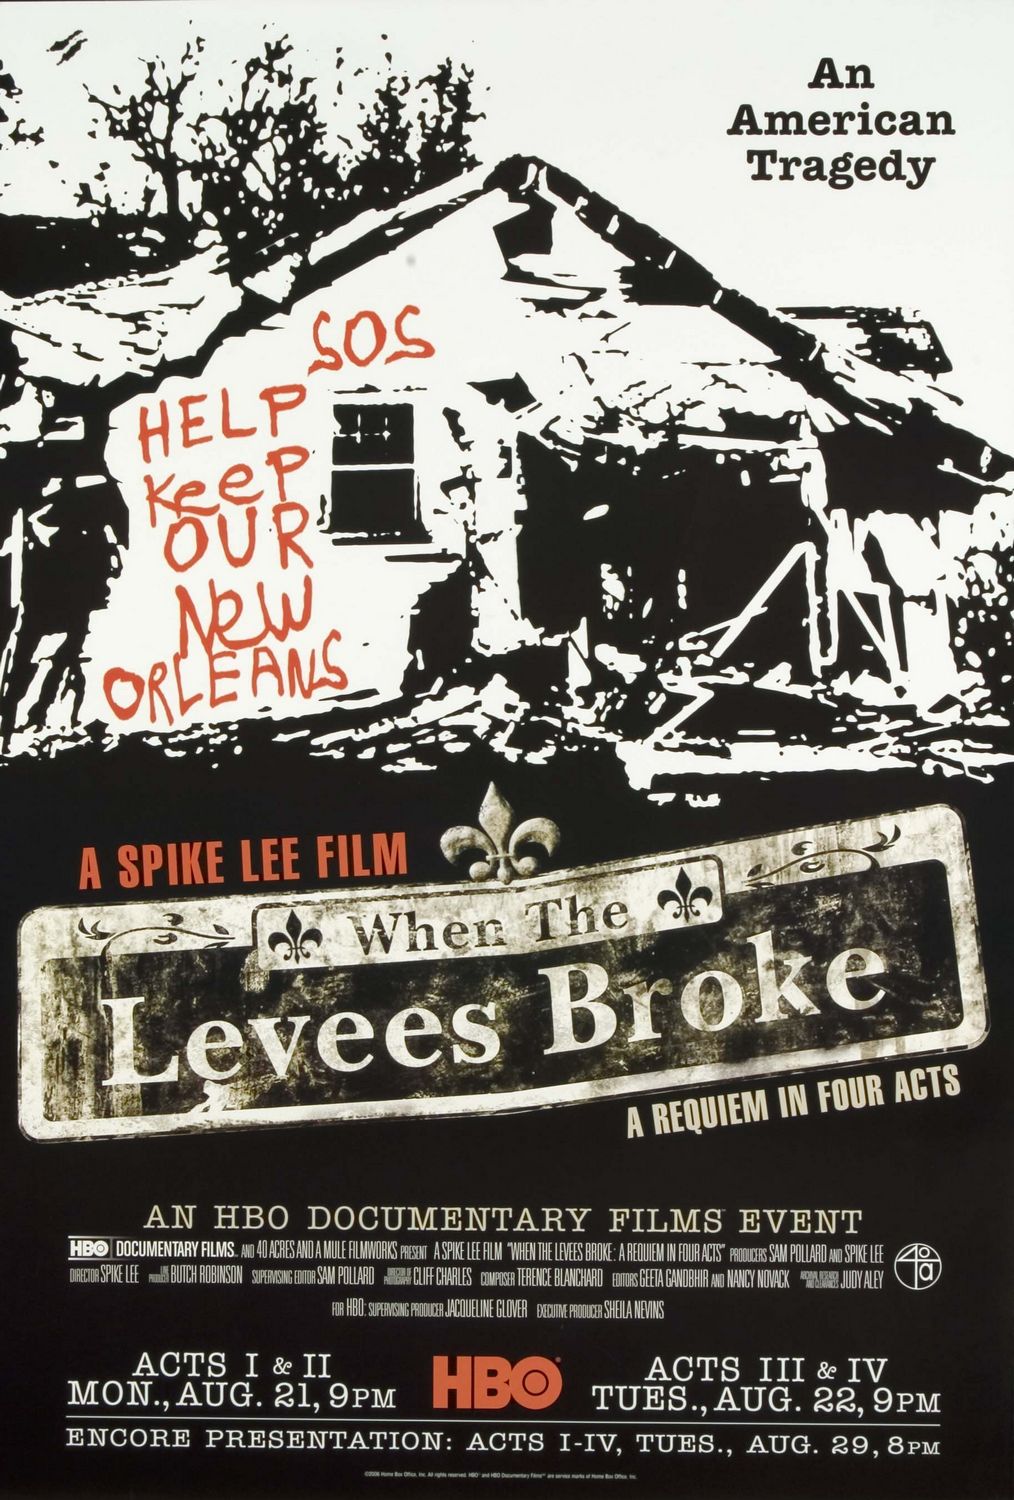 Extra Large TV Poster Image for When the Levees Broke: A Requiem in Four Acts 